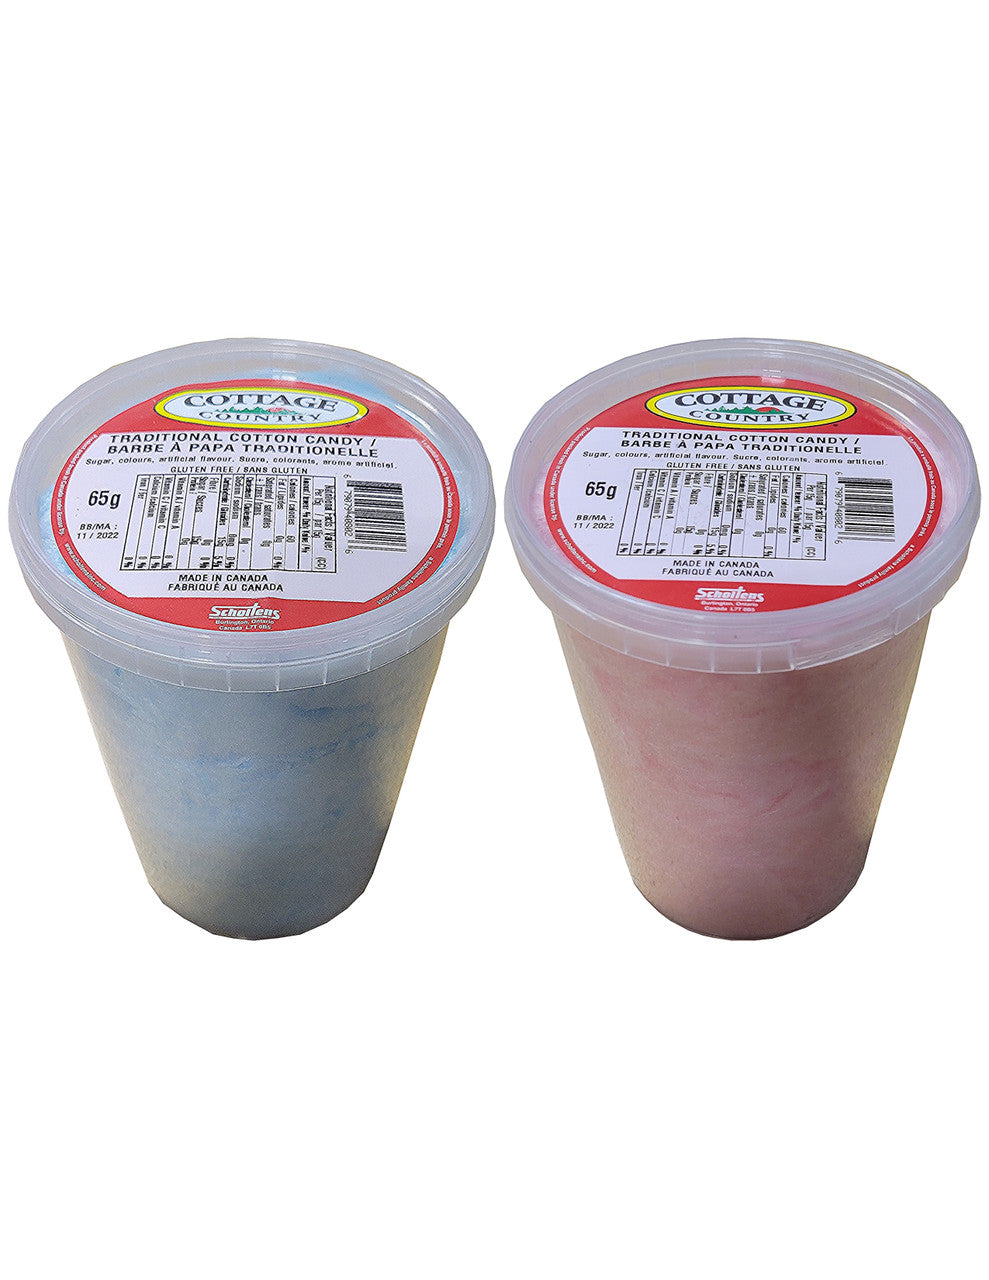 Cottage Country Traditional Cotton Candy, (2pk) Pink & Blue, 65g/2.3 oz, Tubs, {Imported from Canada}